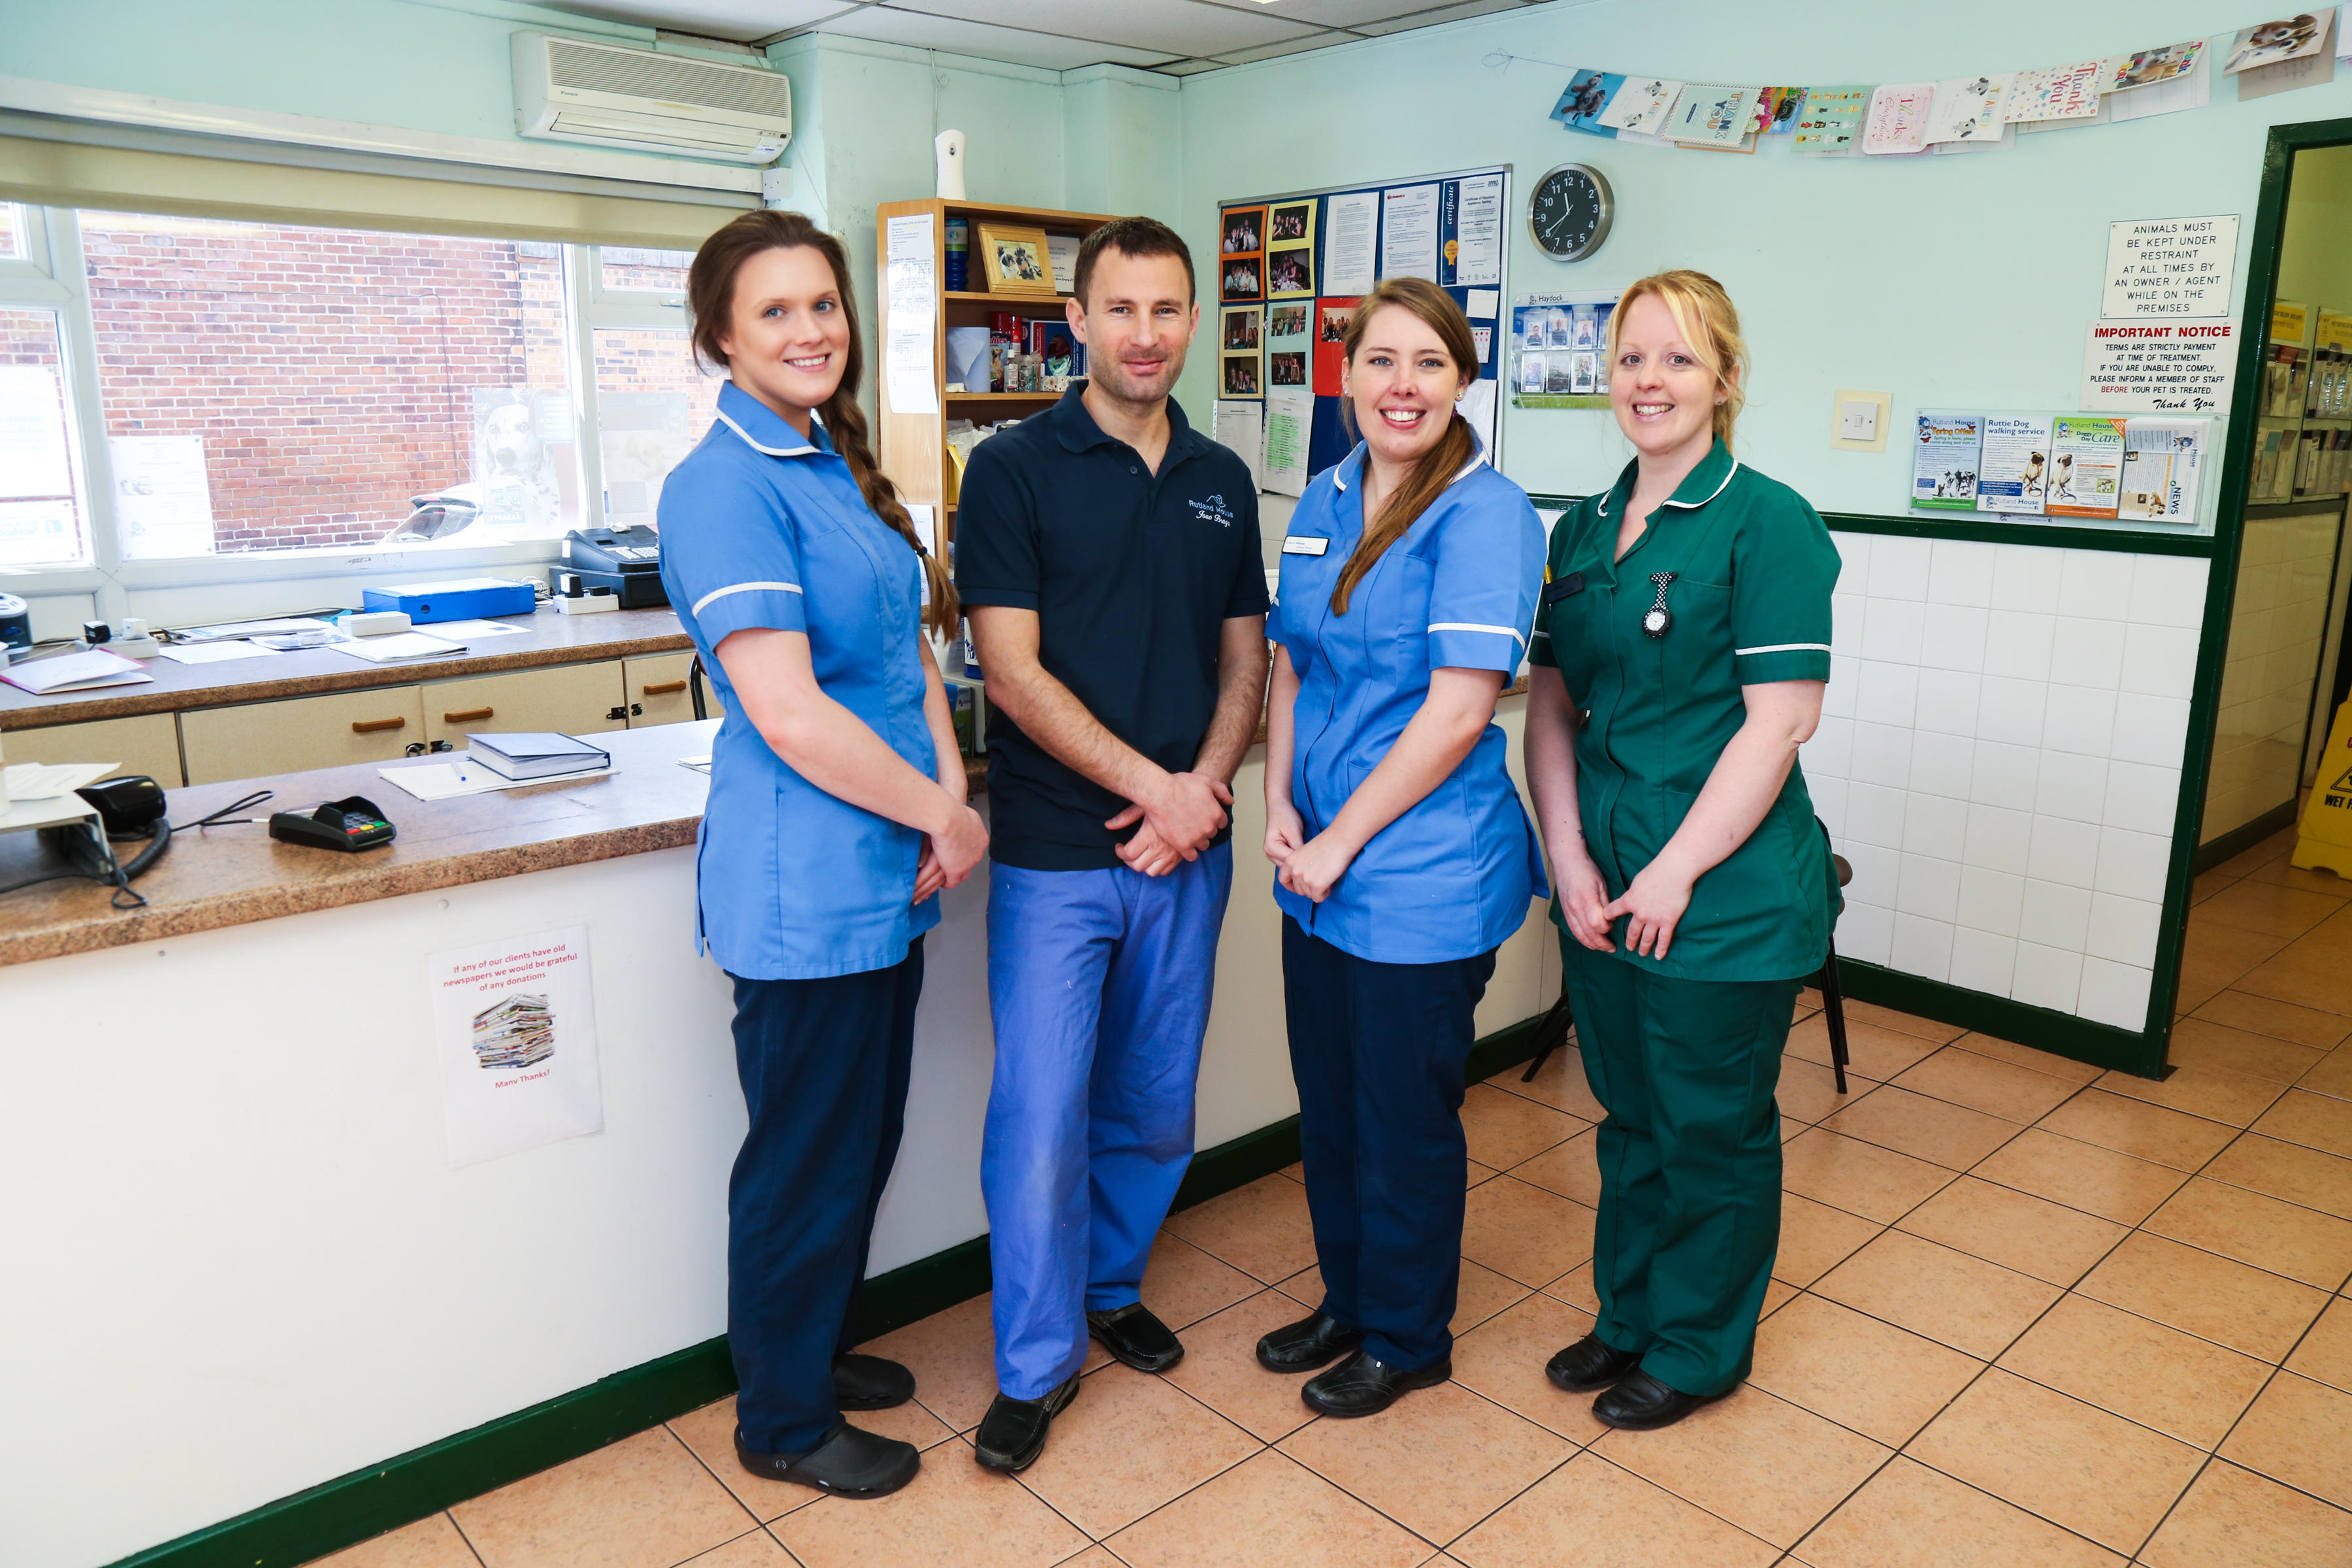 Images Rutland House, The Village Veterinary Surgery